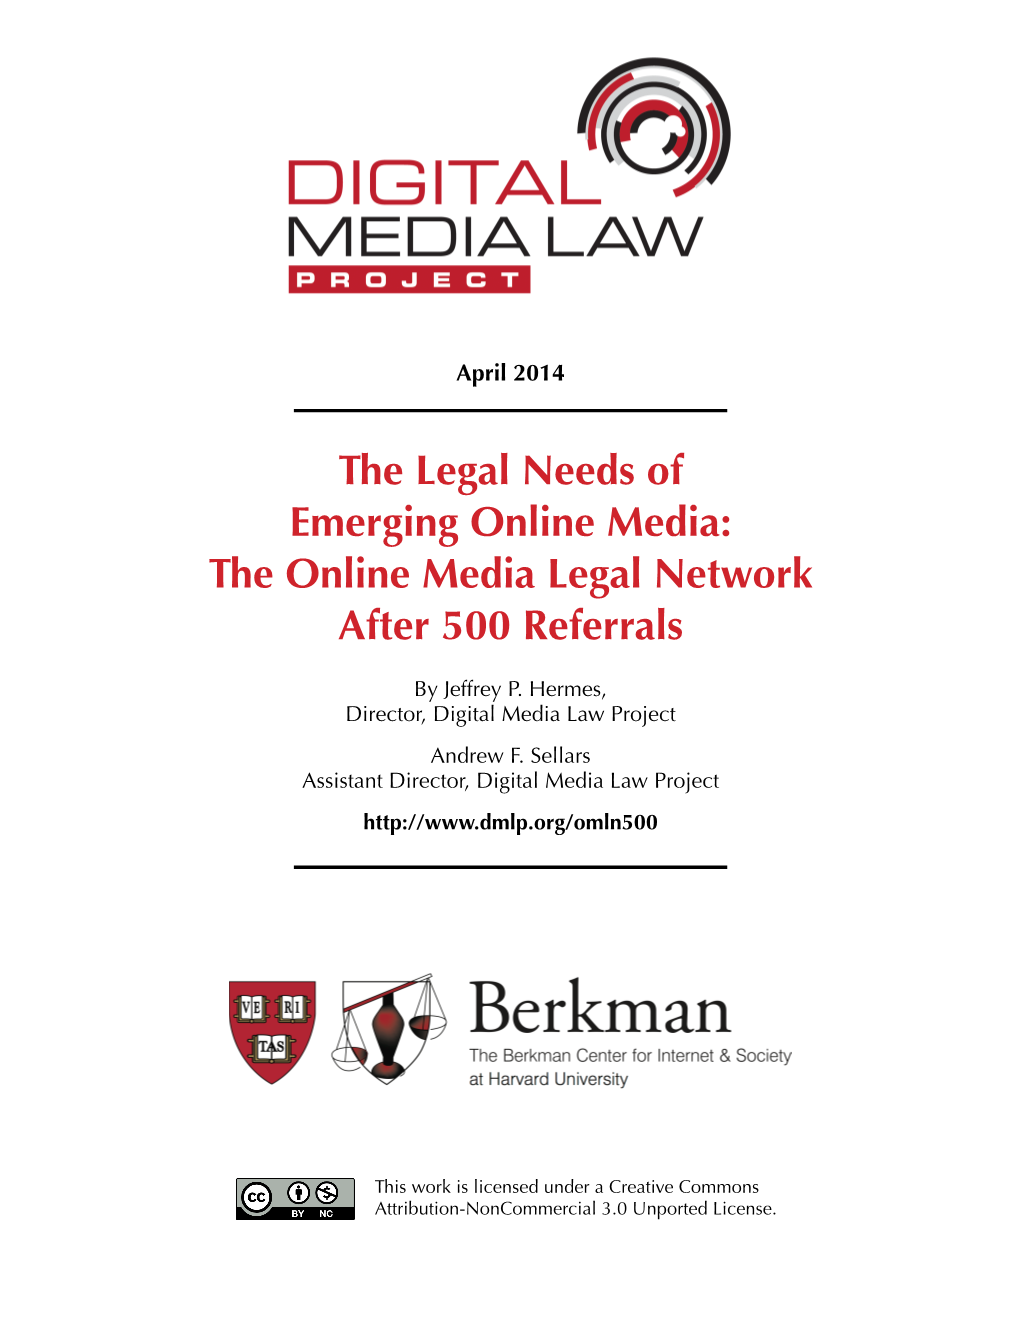 The Online Media Legal Network After 500 Referrals